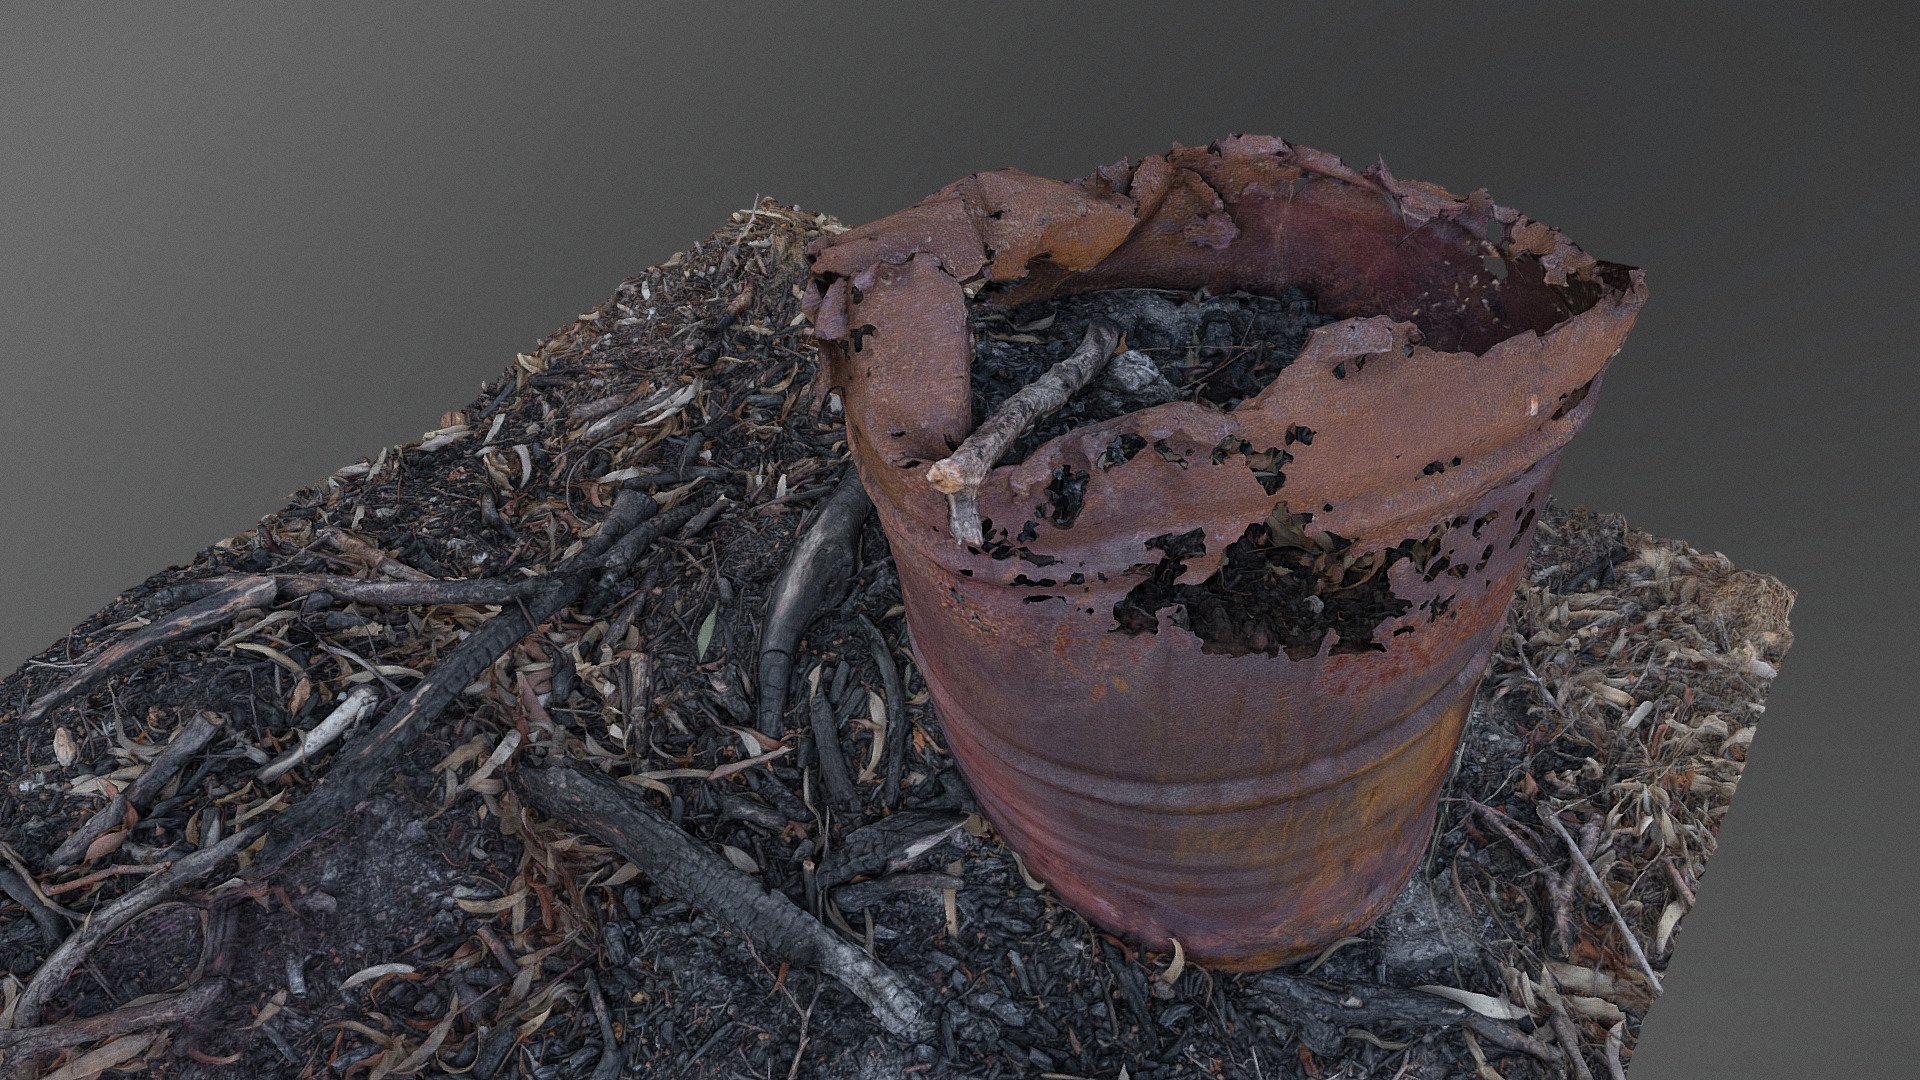 Homeless people hideout shelter spot brunt nurned rusty old barrel fire and charred wood timber ranches logs scene

photogrammetry scan (150x36mp), 1x8k textures + hd normals - Burnt barrel - Buy Royalty Free 3D model by matousekfoto 3d model